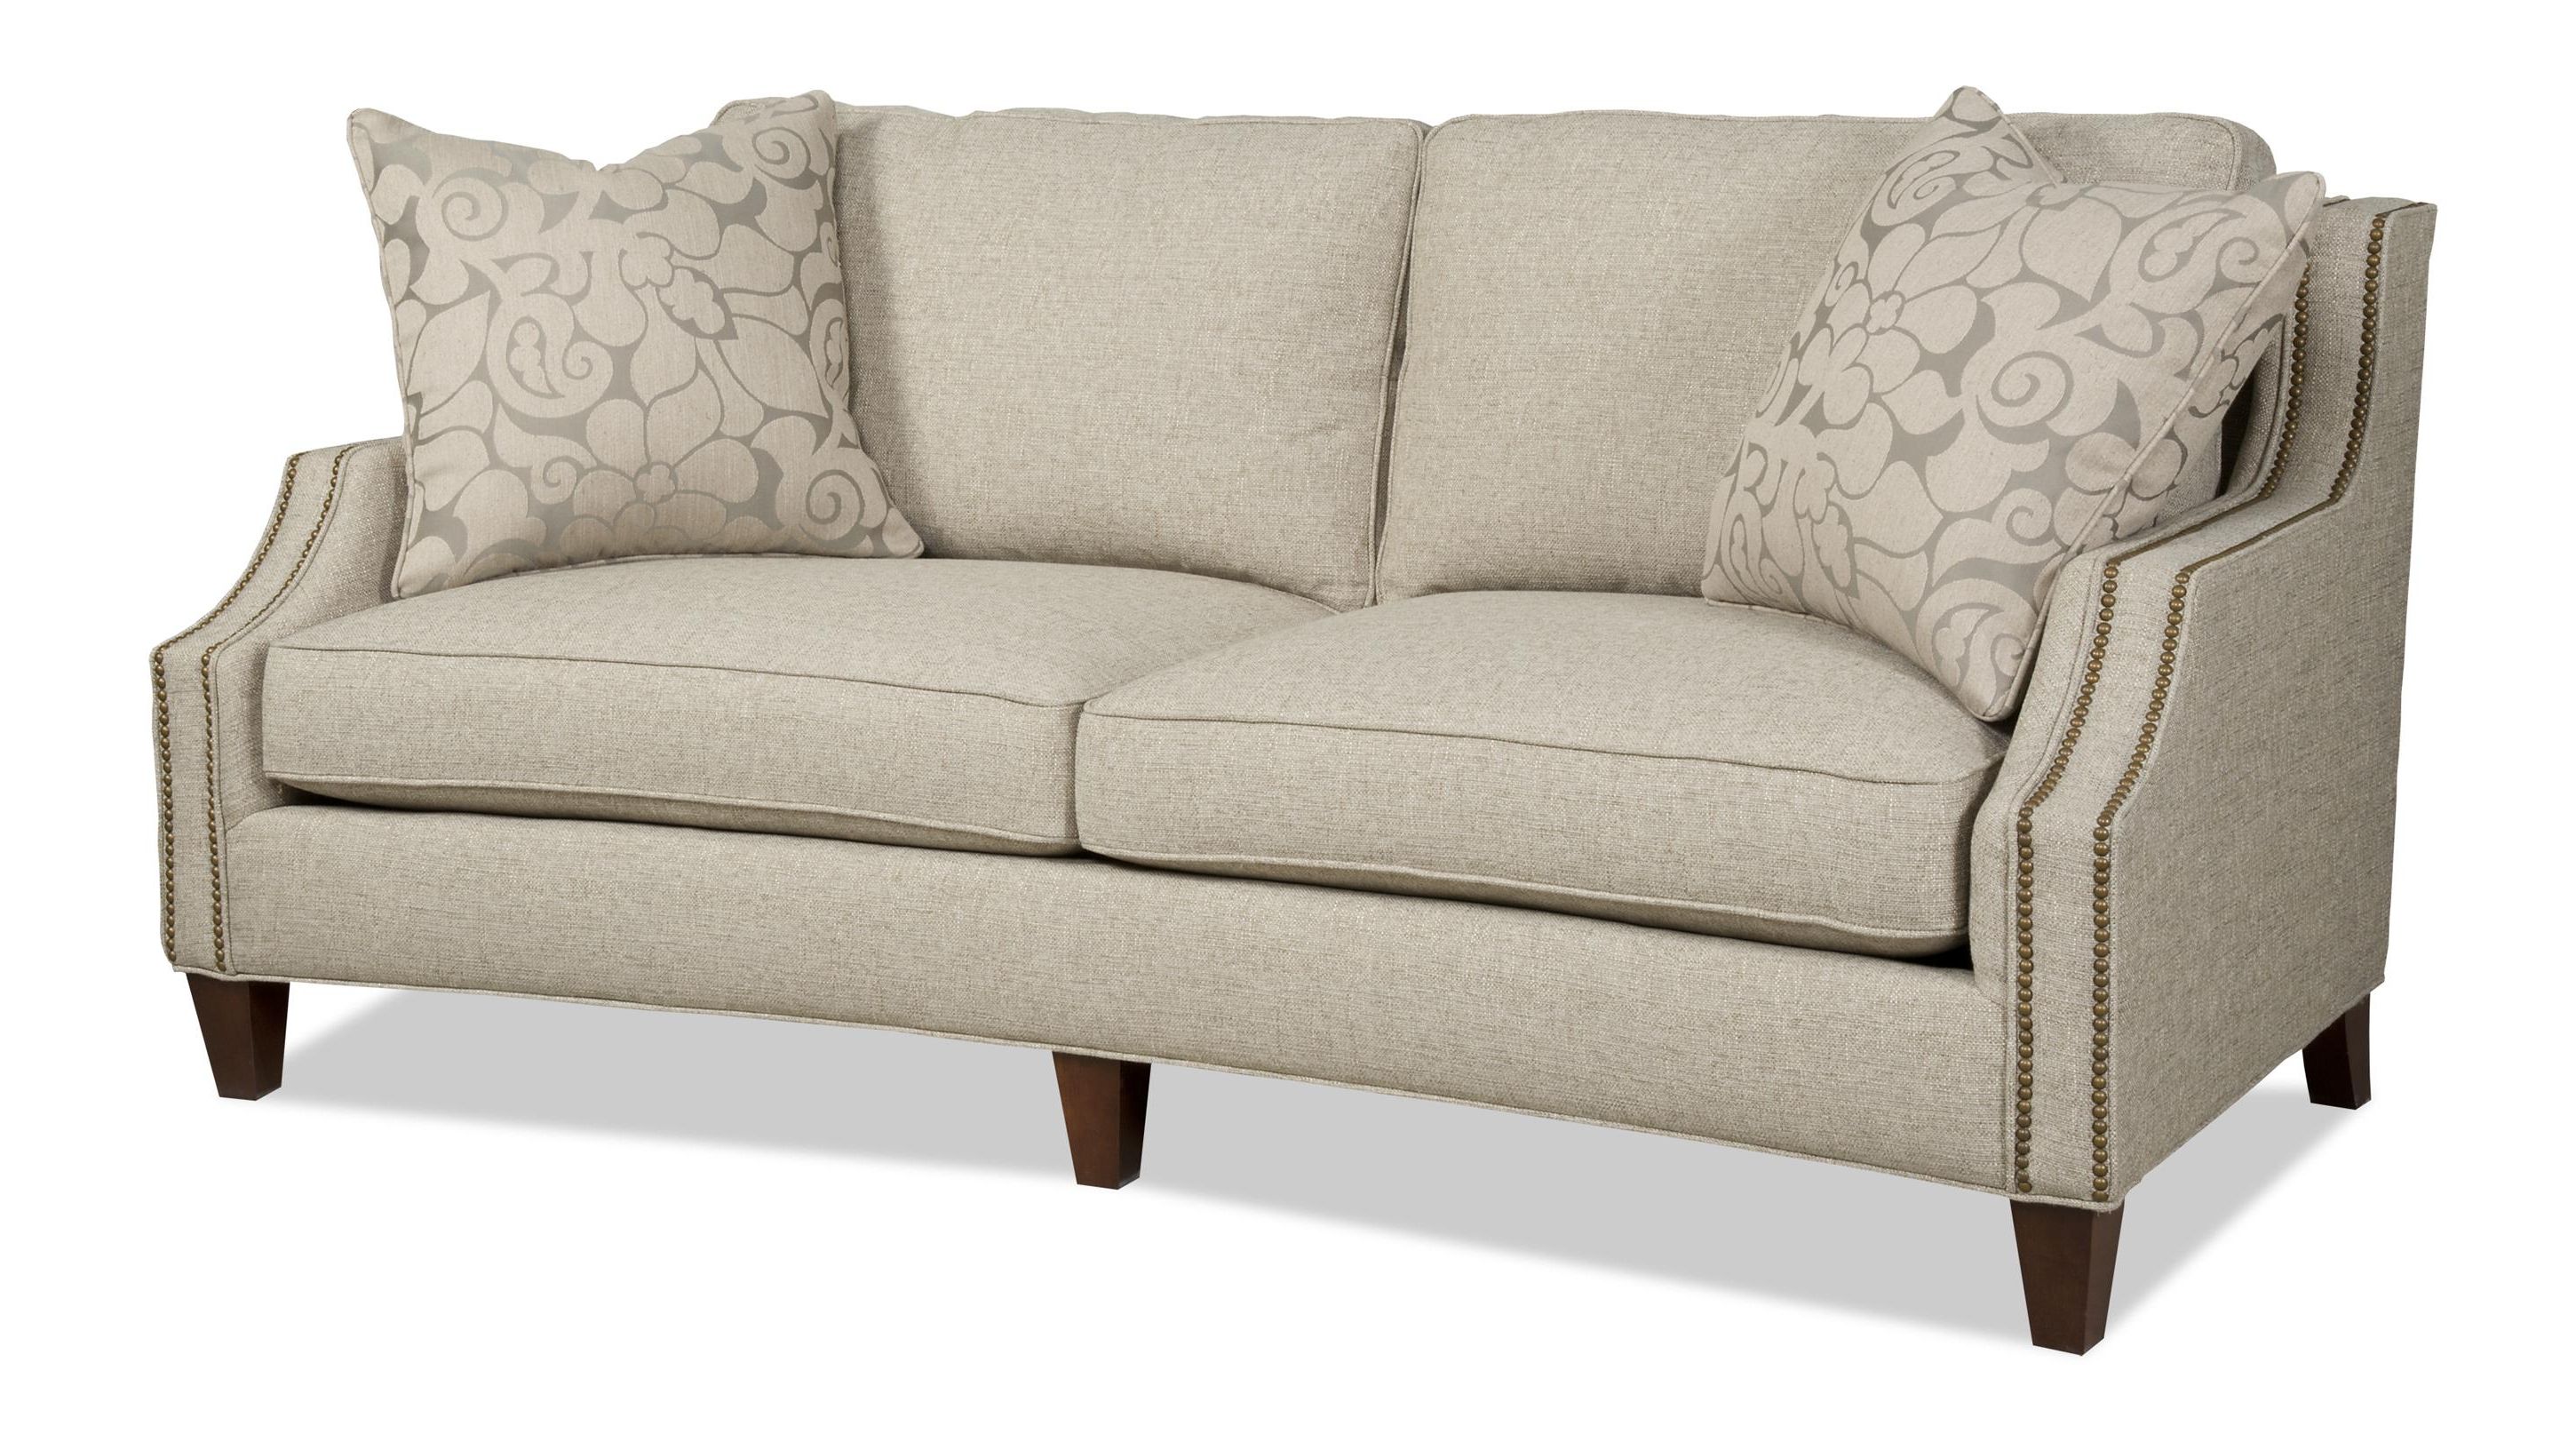 Sam Moore Austin Contemporary Two Over Two Sofa With Nailhead Trim |  Sprintz Furniture | Sofa Within Sofas With Nailhead Trim (Gallery 1 of 20)